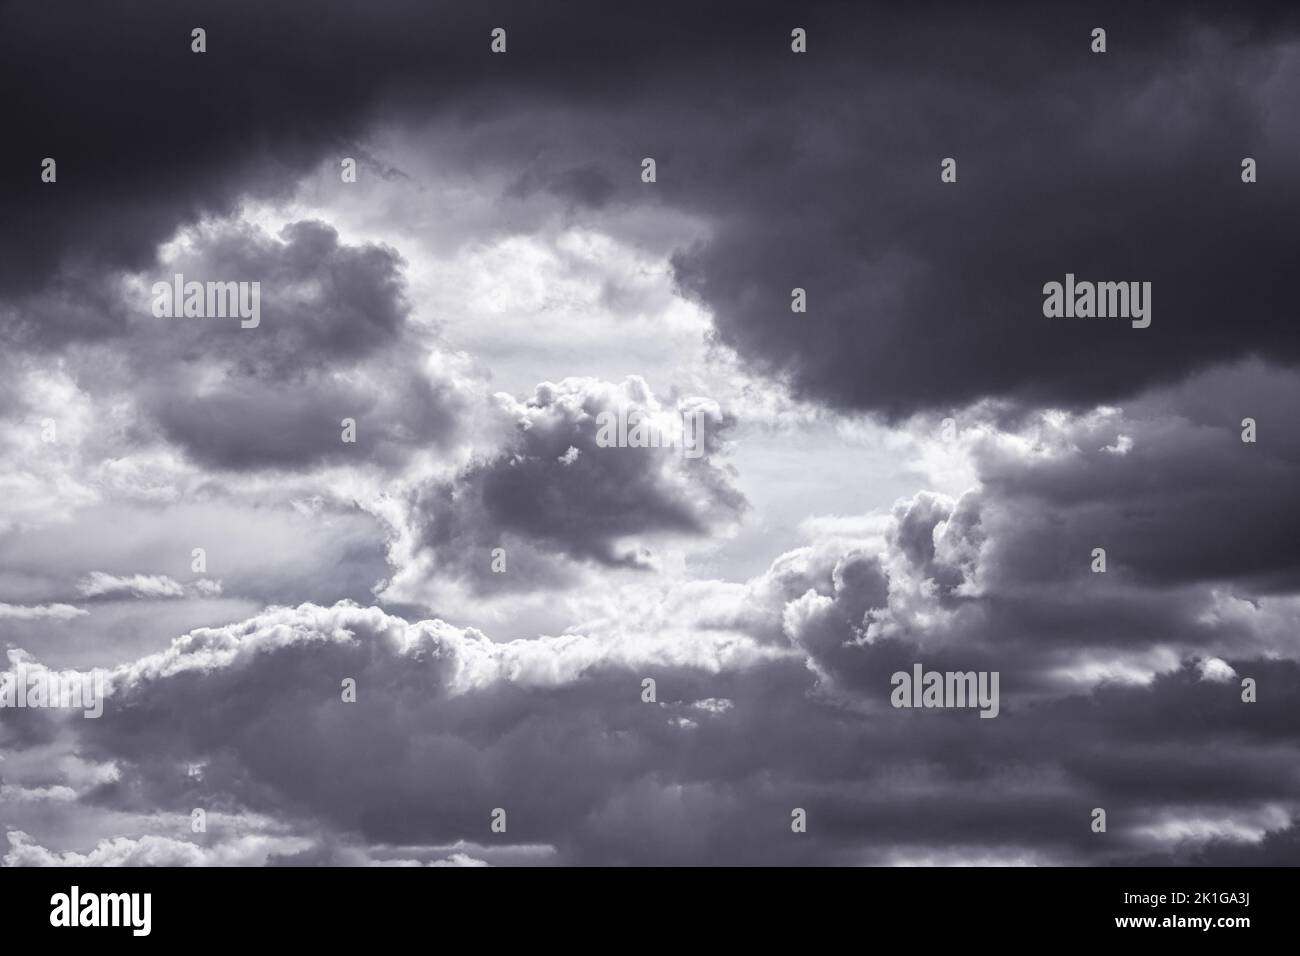 Autumn dark ragged sky with clouds of different shapes and sizes. Stock Photo